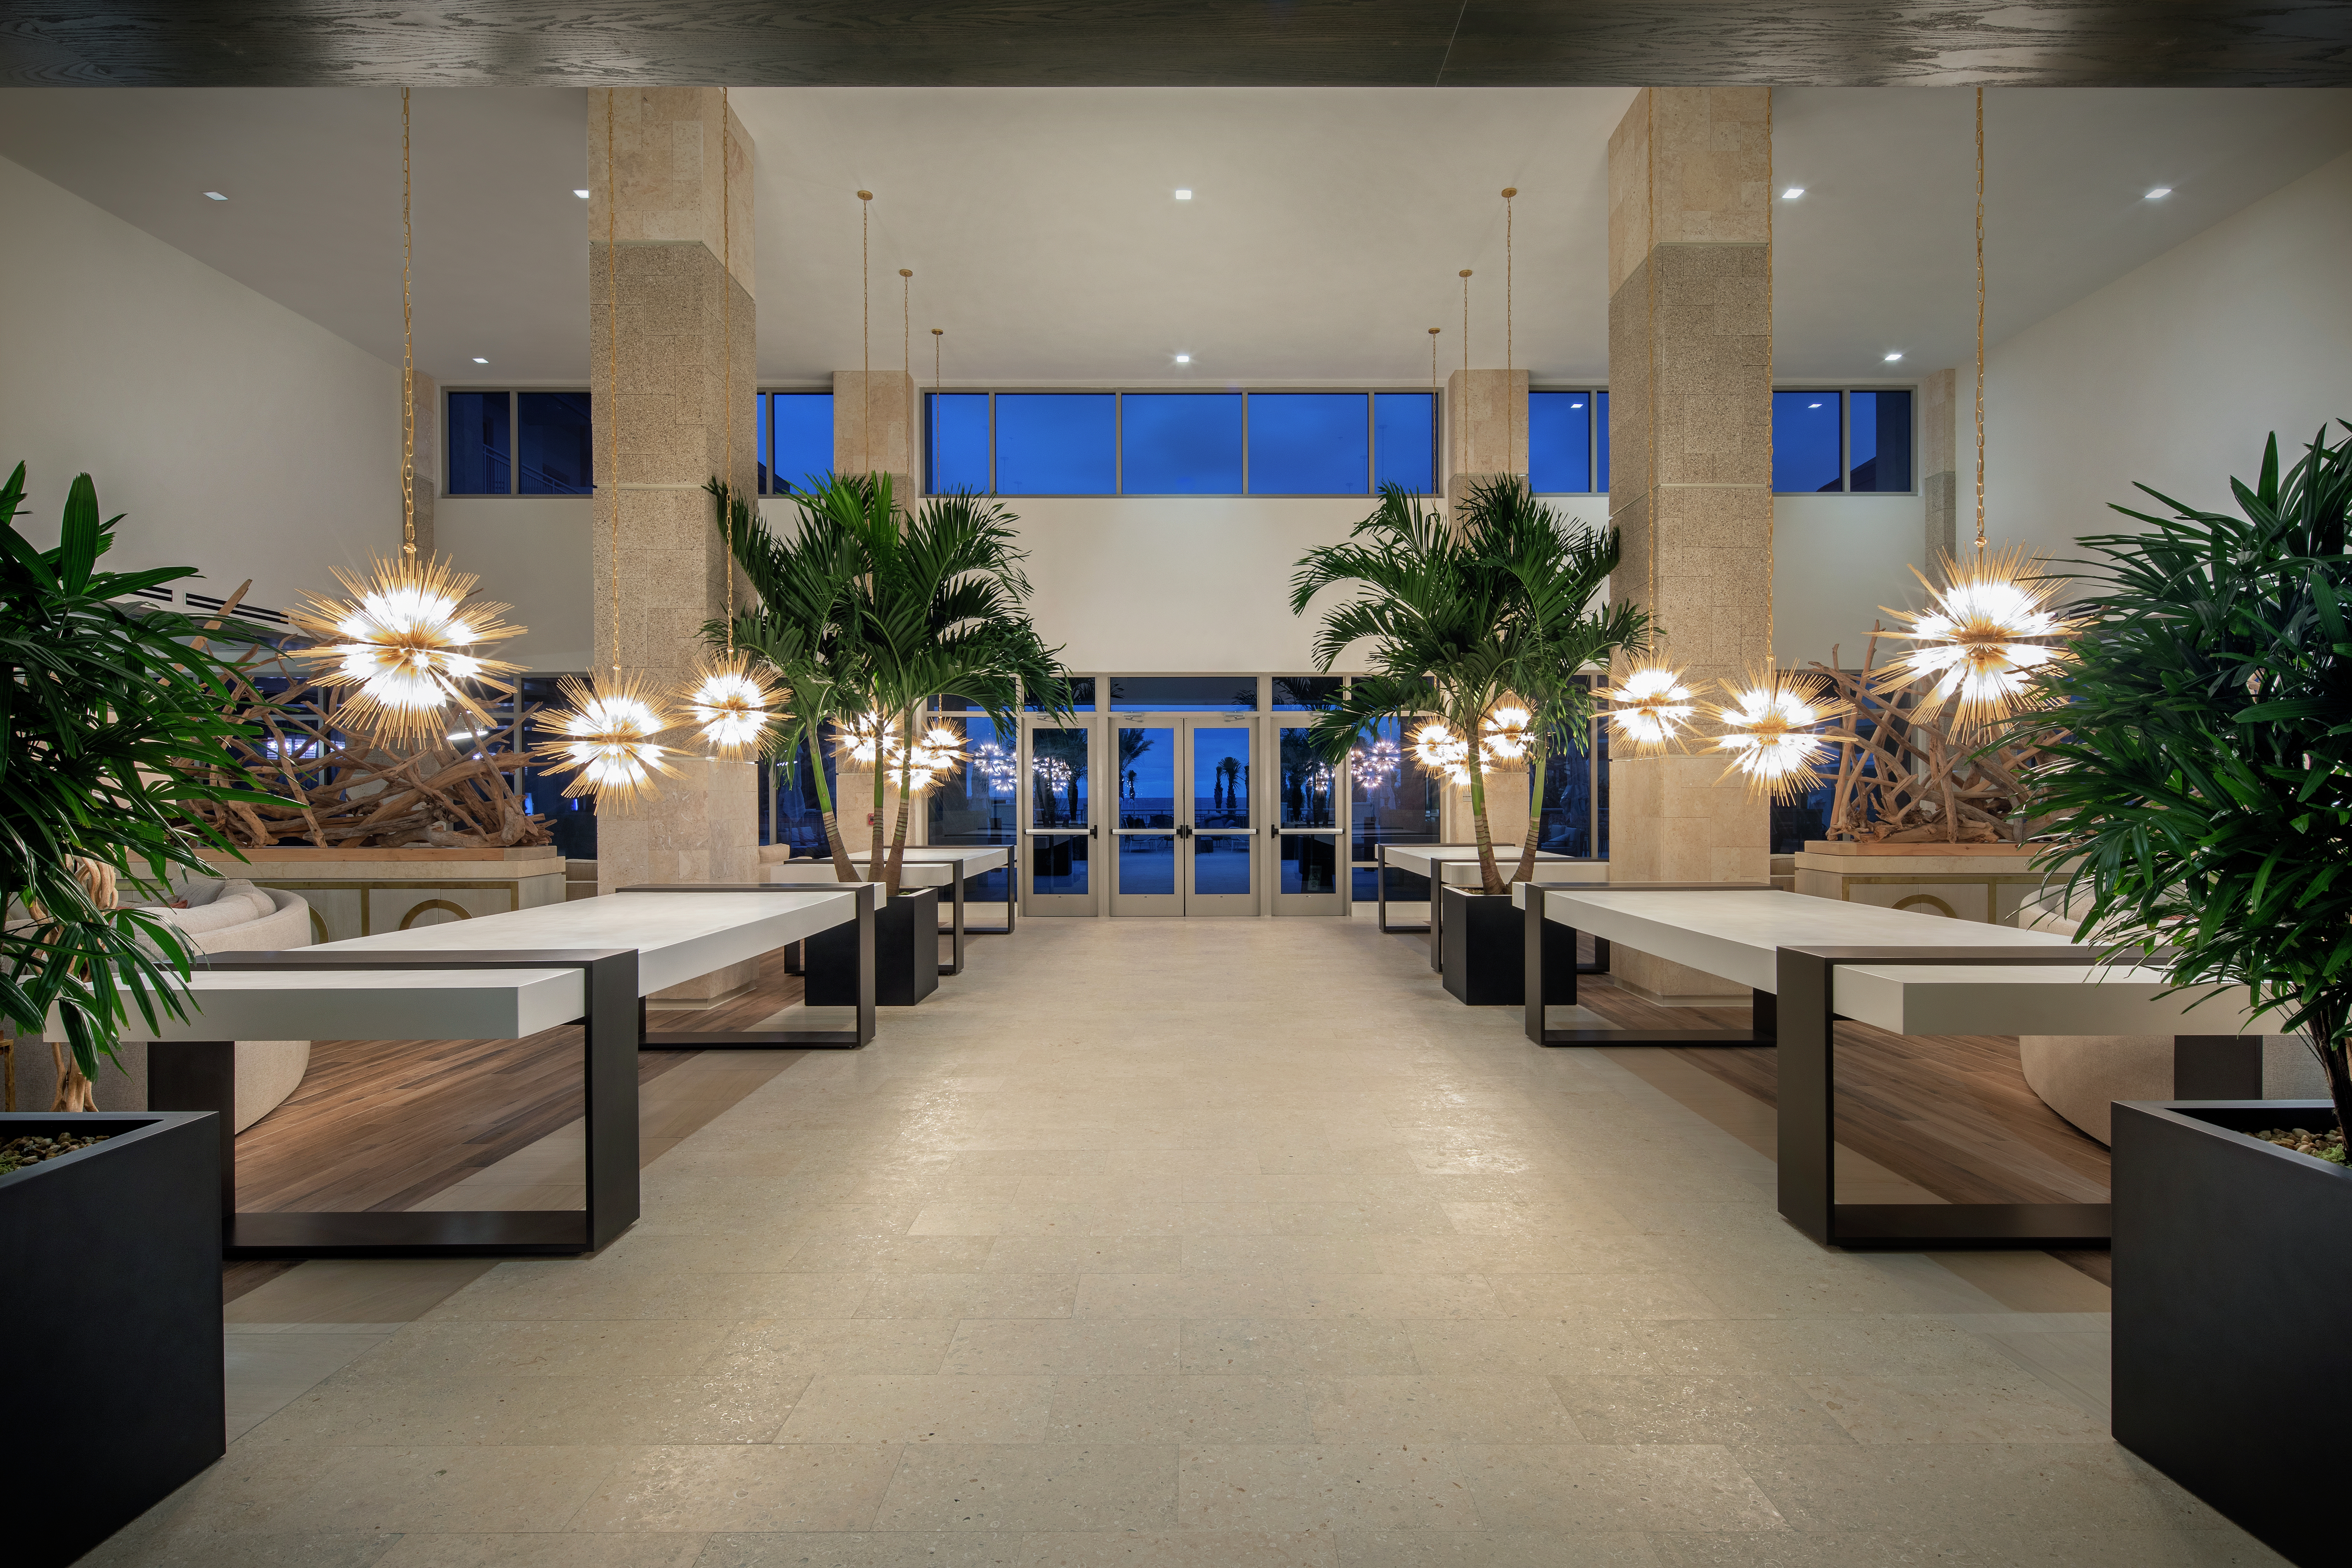 View of Front Entrance, Contemporary Light Fixtures, and Furnishings in Hotel Lobby